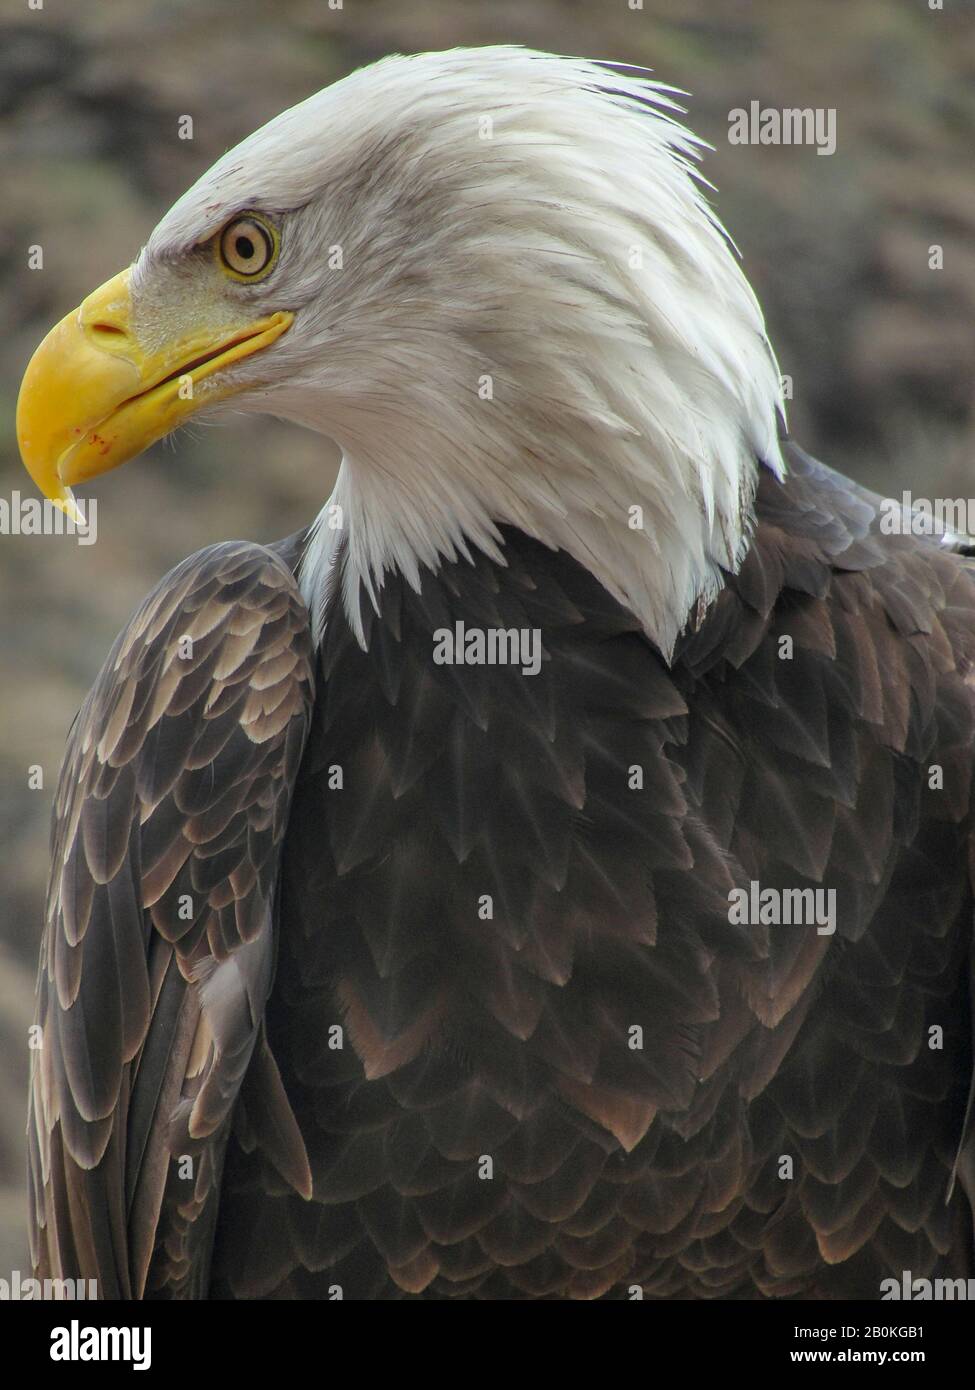 American eagle, symbol of a nation, United States of America Stock Photo